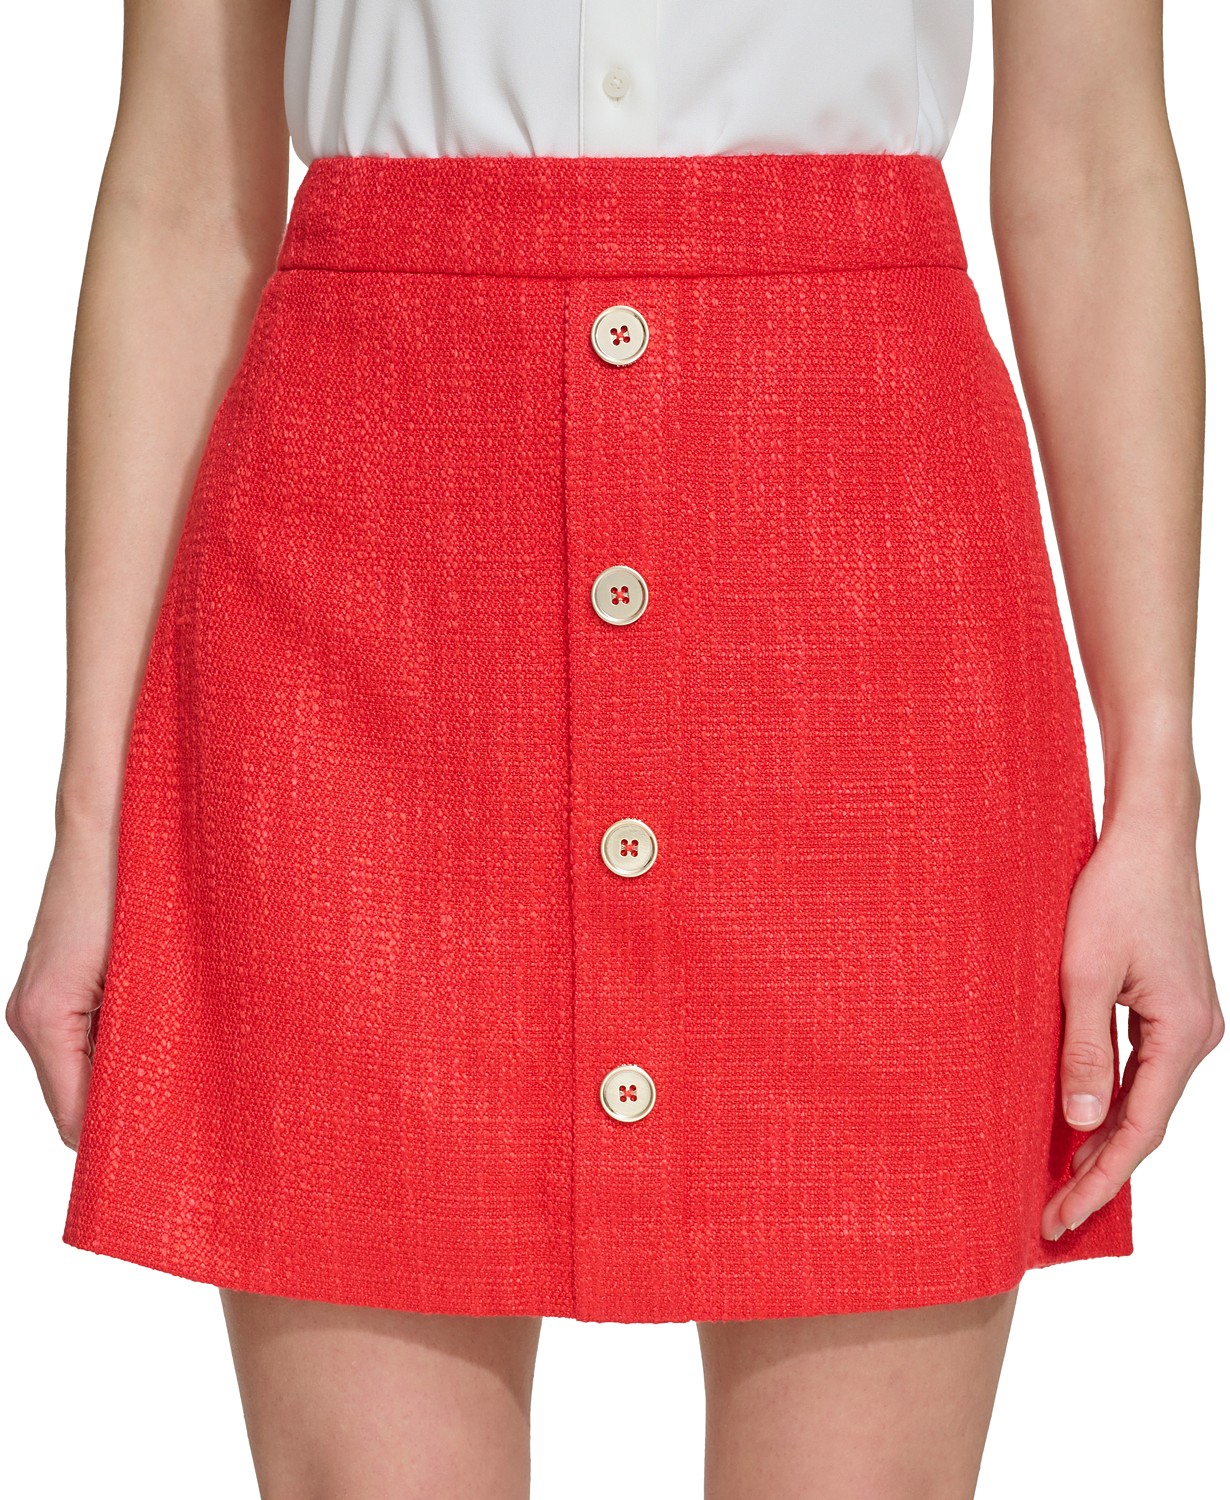 DKNY Womens Faux-Button-Front Tweed Mini Skirt